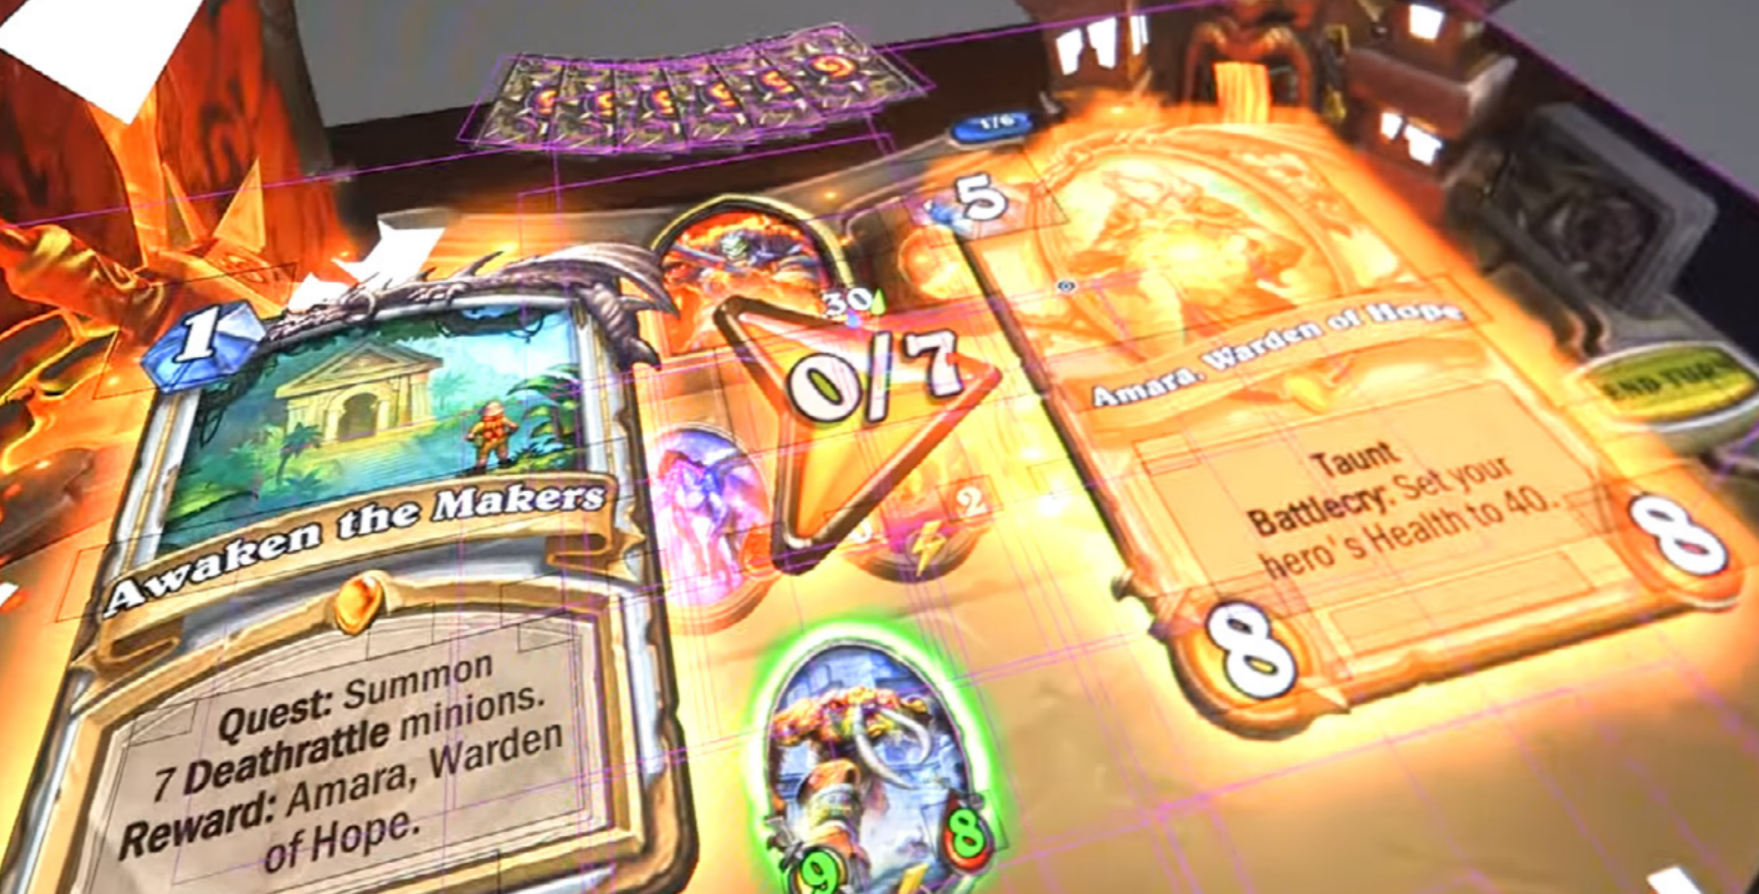 Image of Heartstone card game